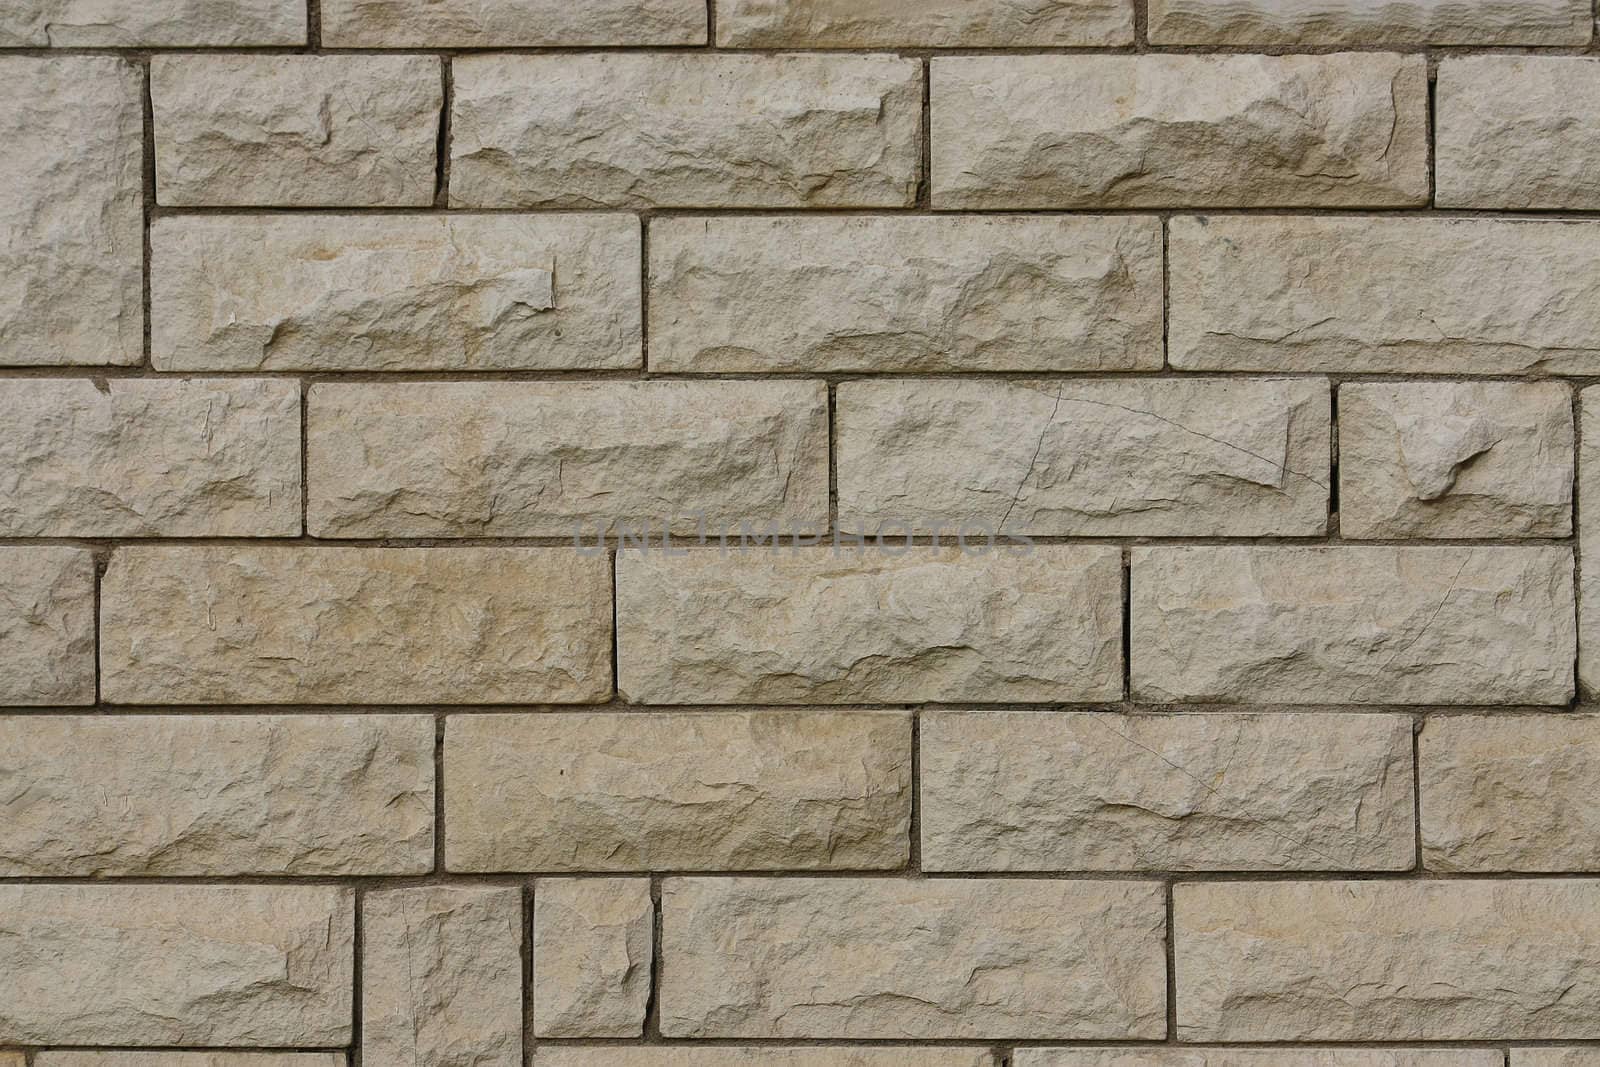 This interesting background represents the wall of a building combined from stones.